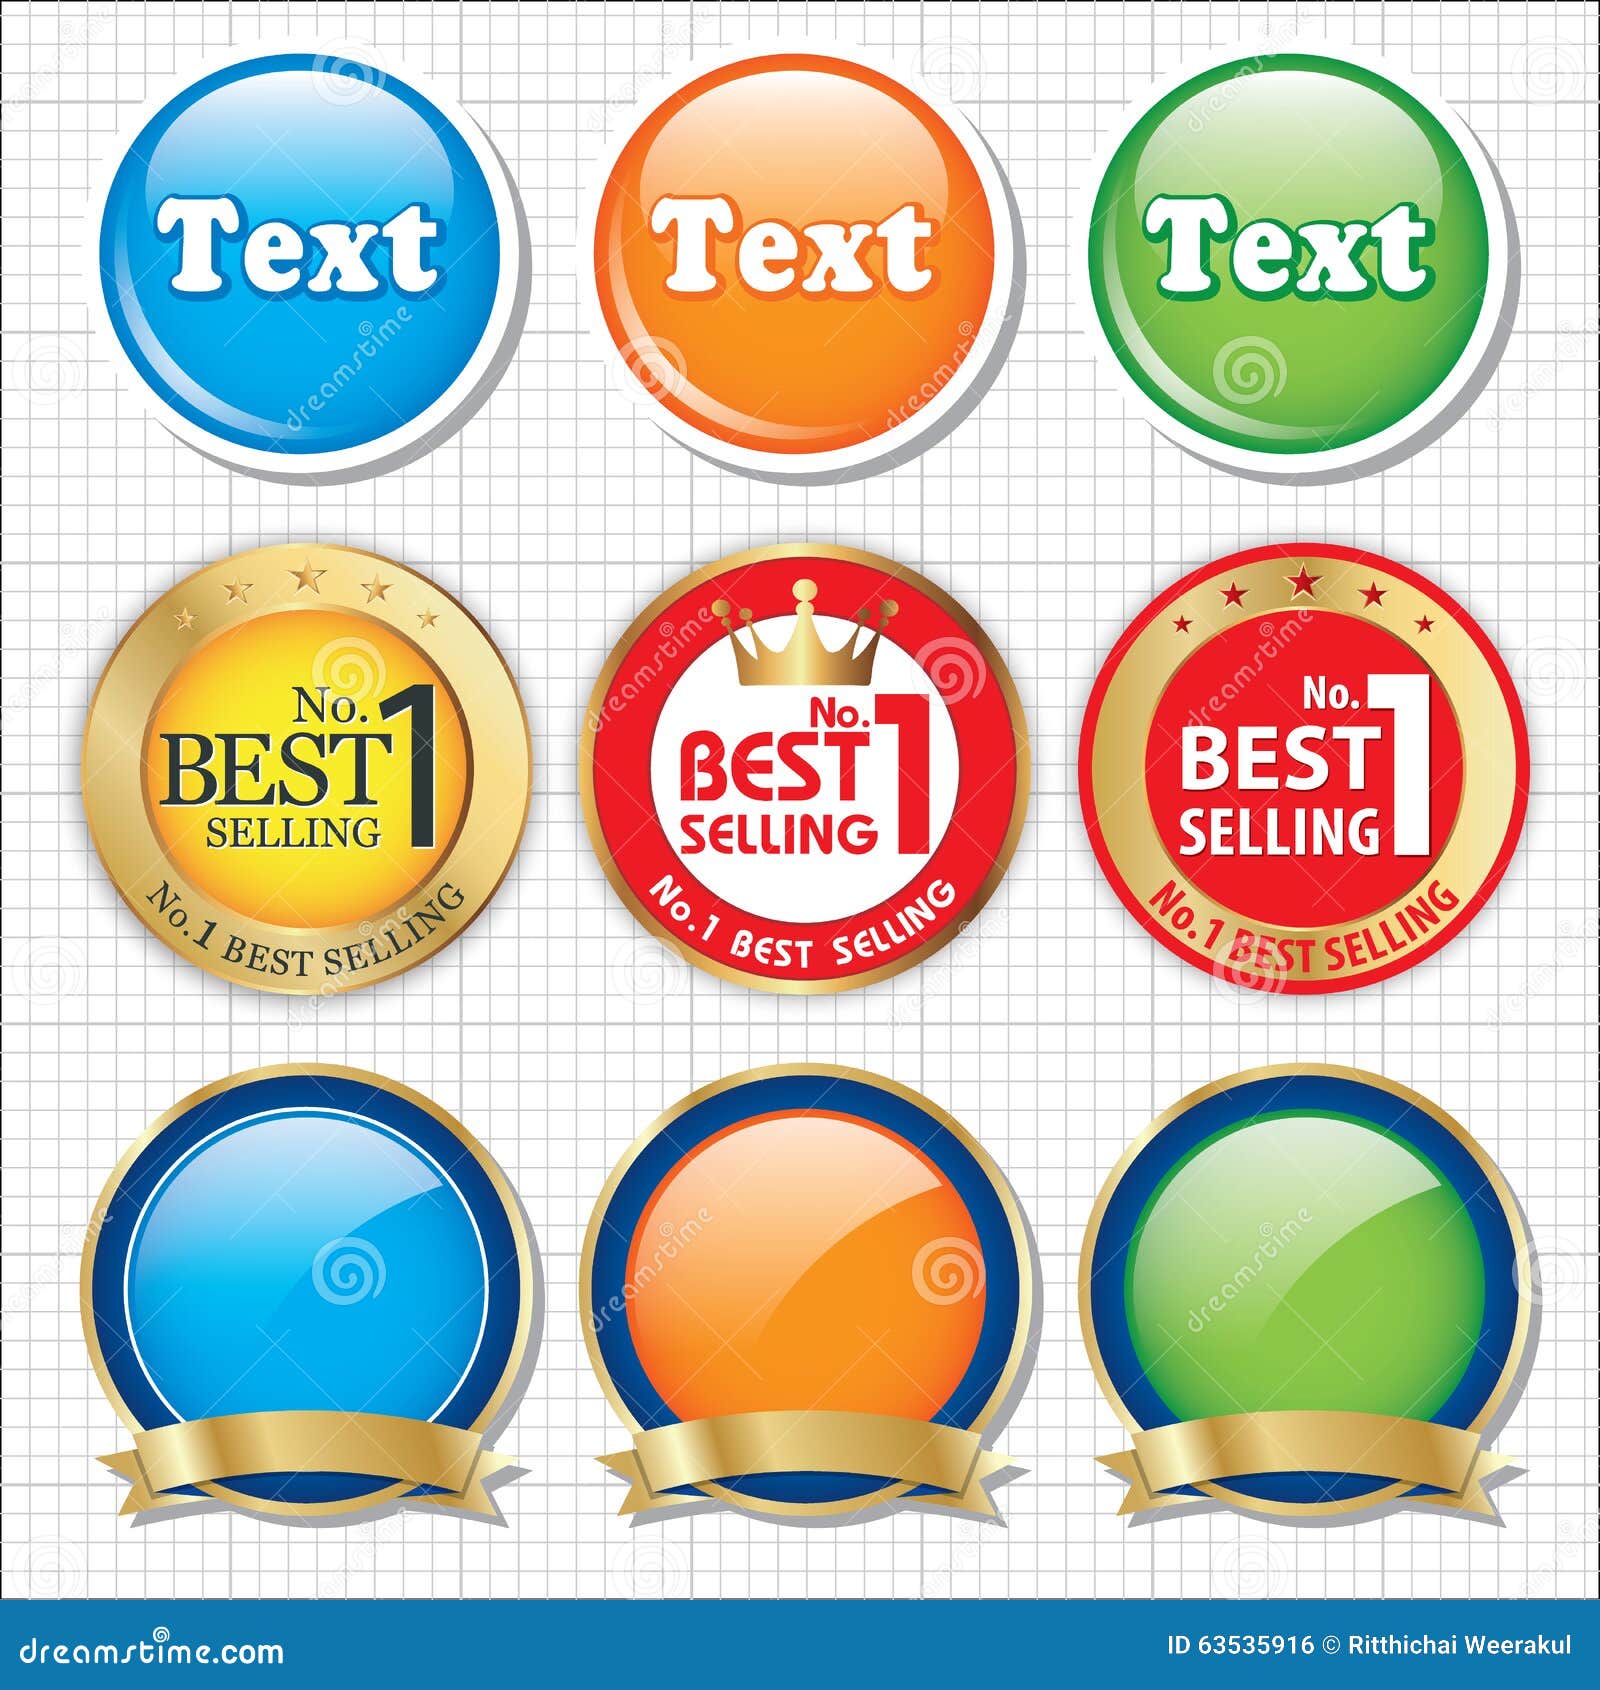 Best selling icon stock vector. Illustration of creative - 63535916